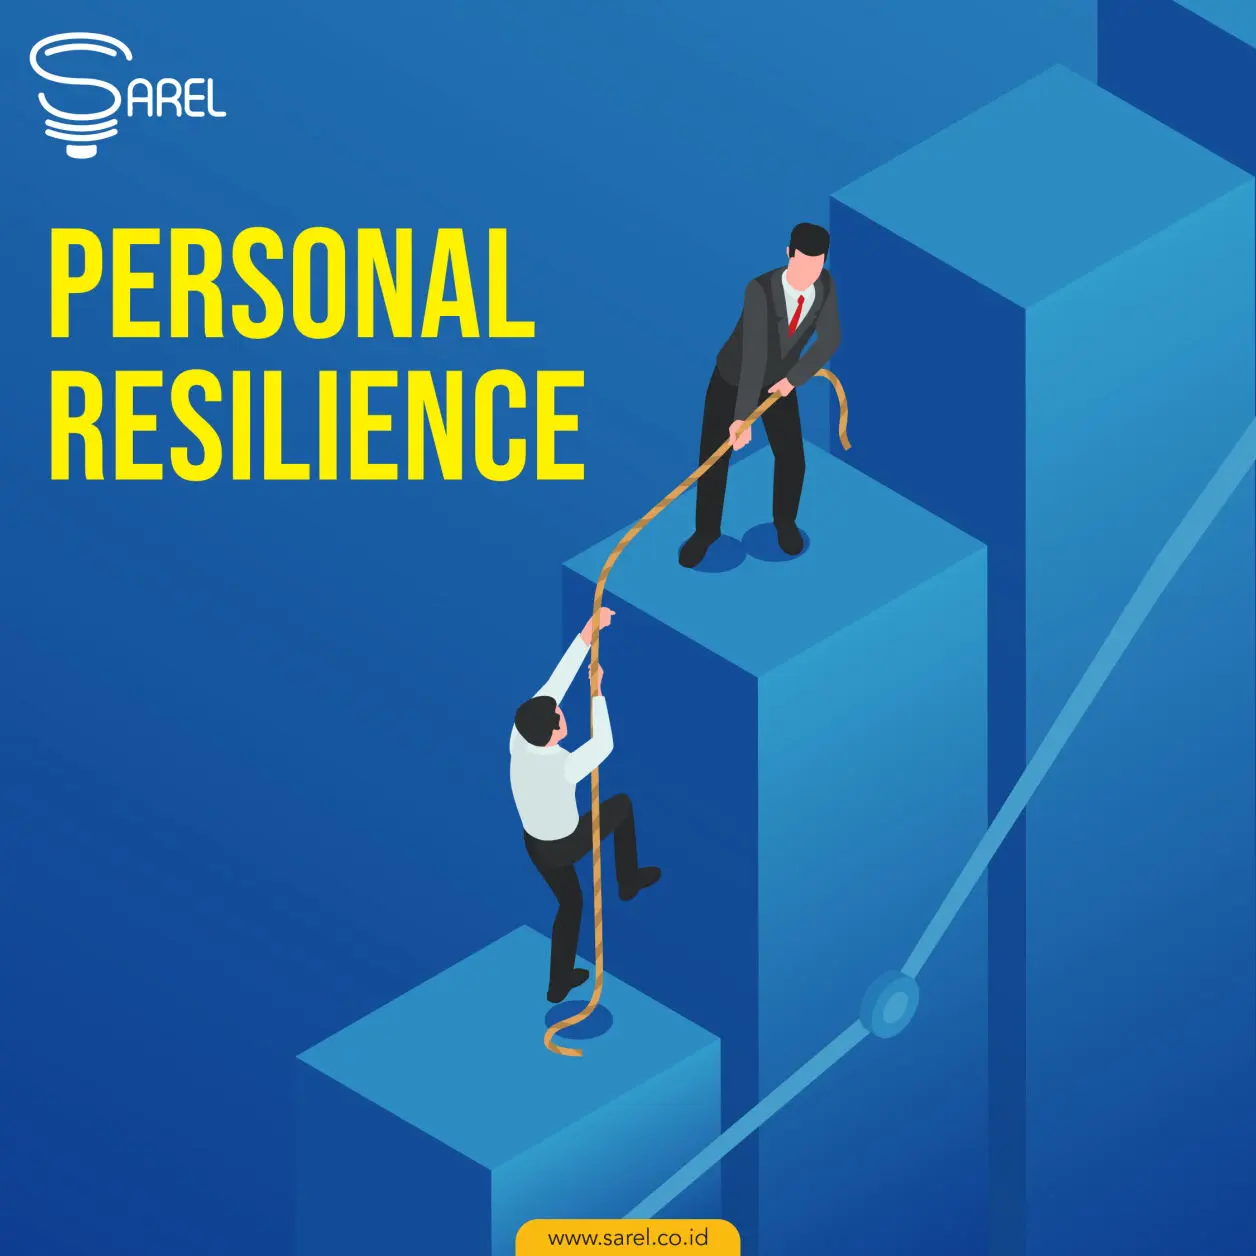 A230414-Personal-Resilience